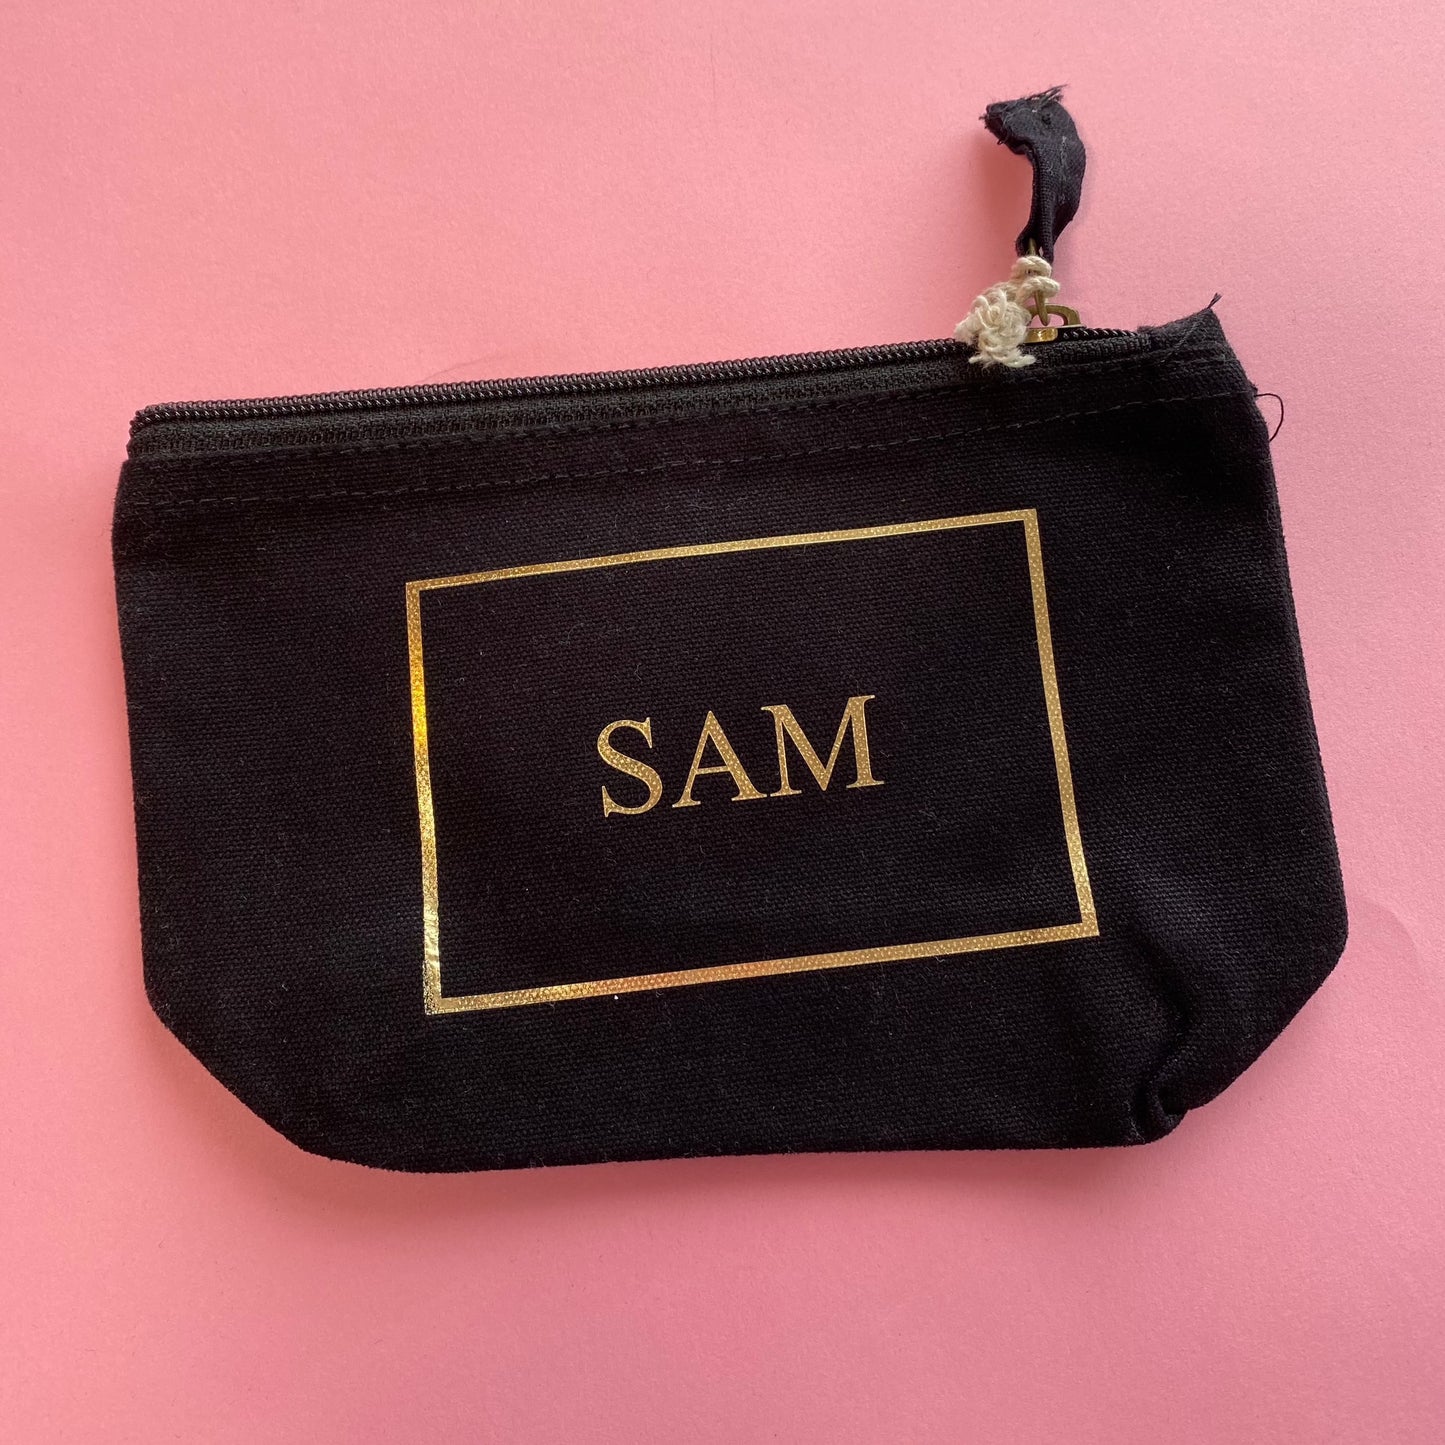 SAM Monogram name gold text - Black Small Pouch Bag SALE